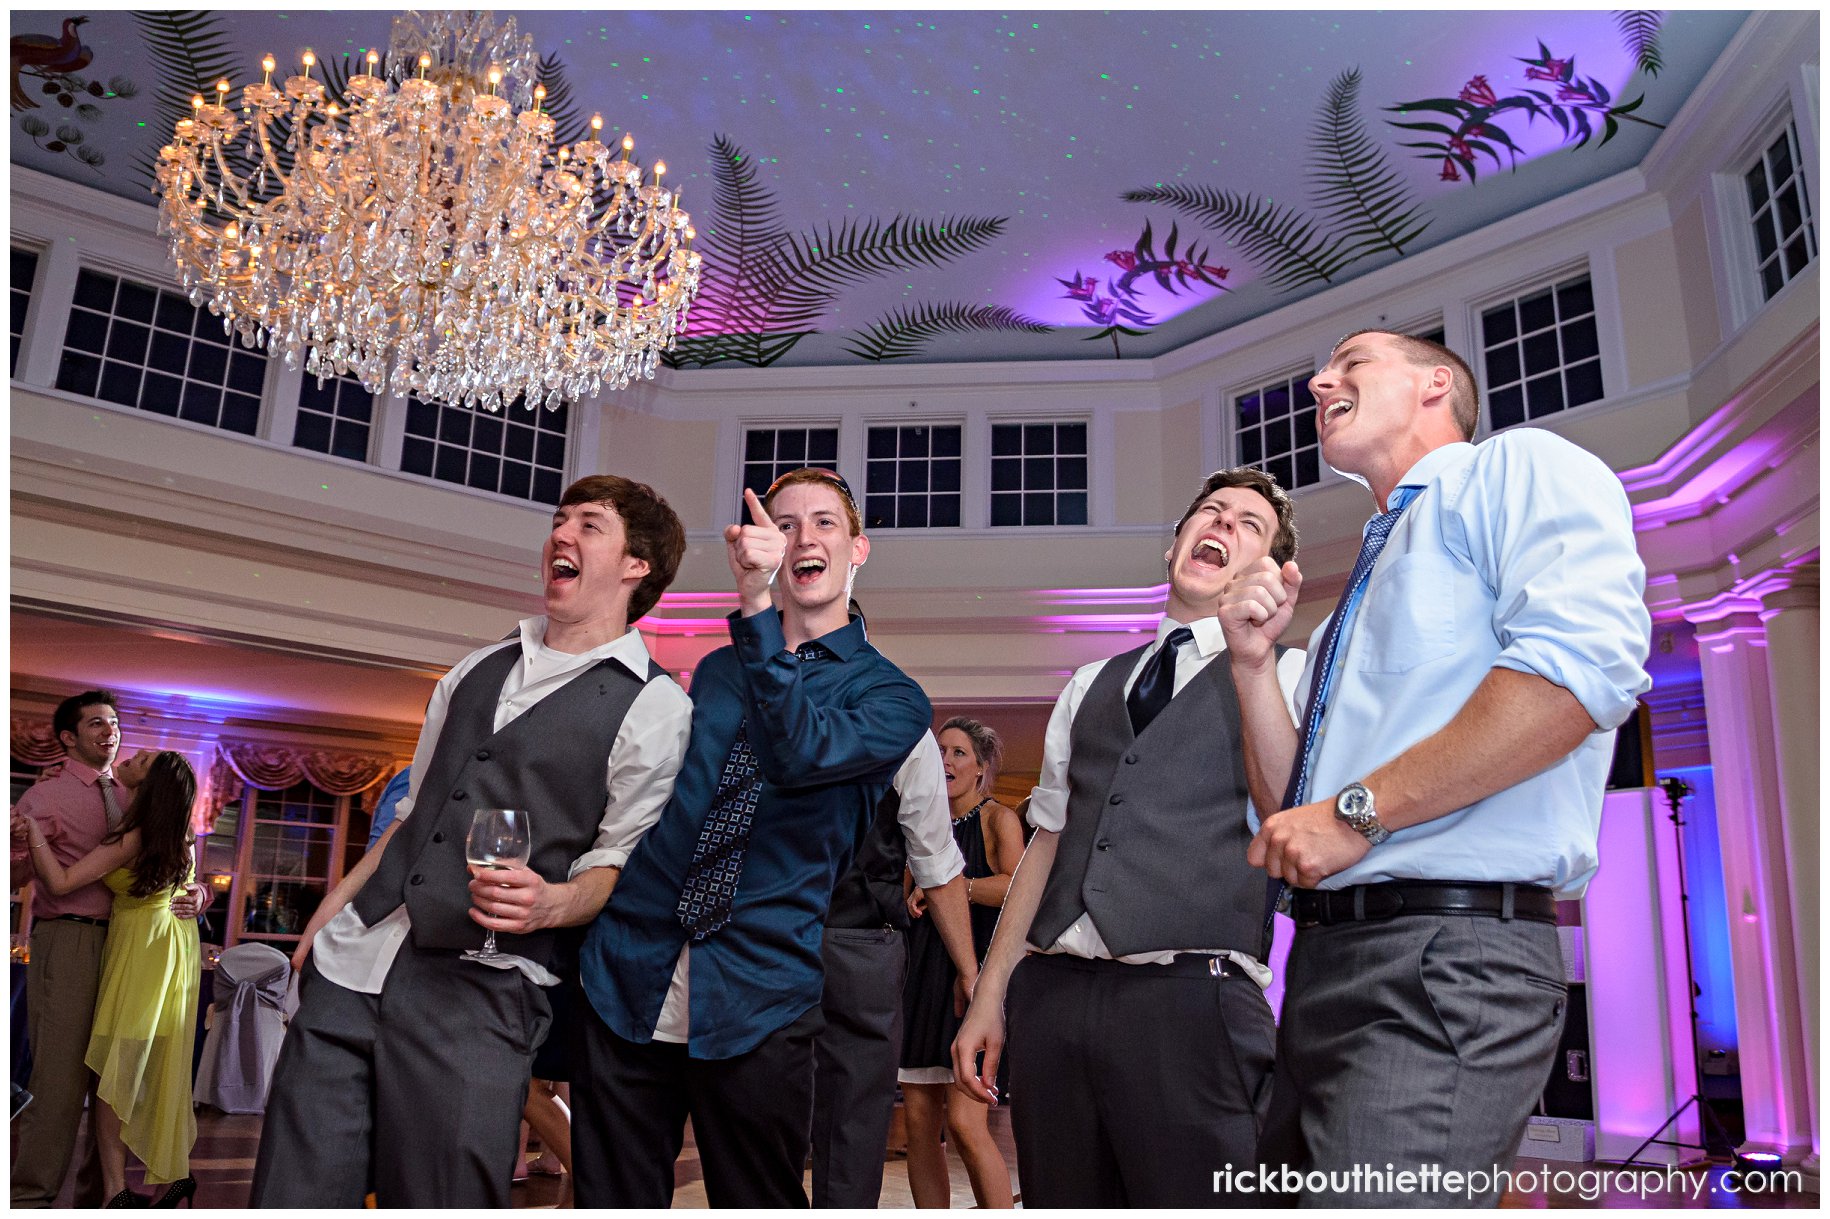 the groom and friends belting one out at wedding reception.